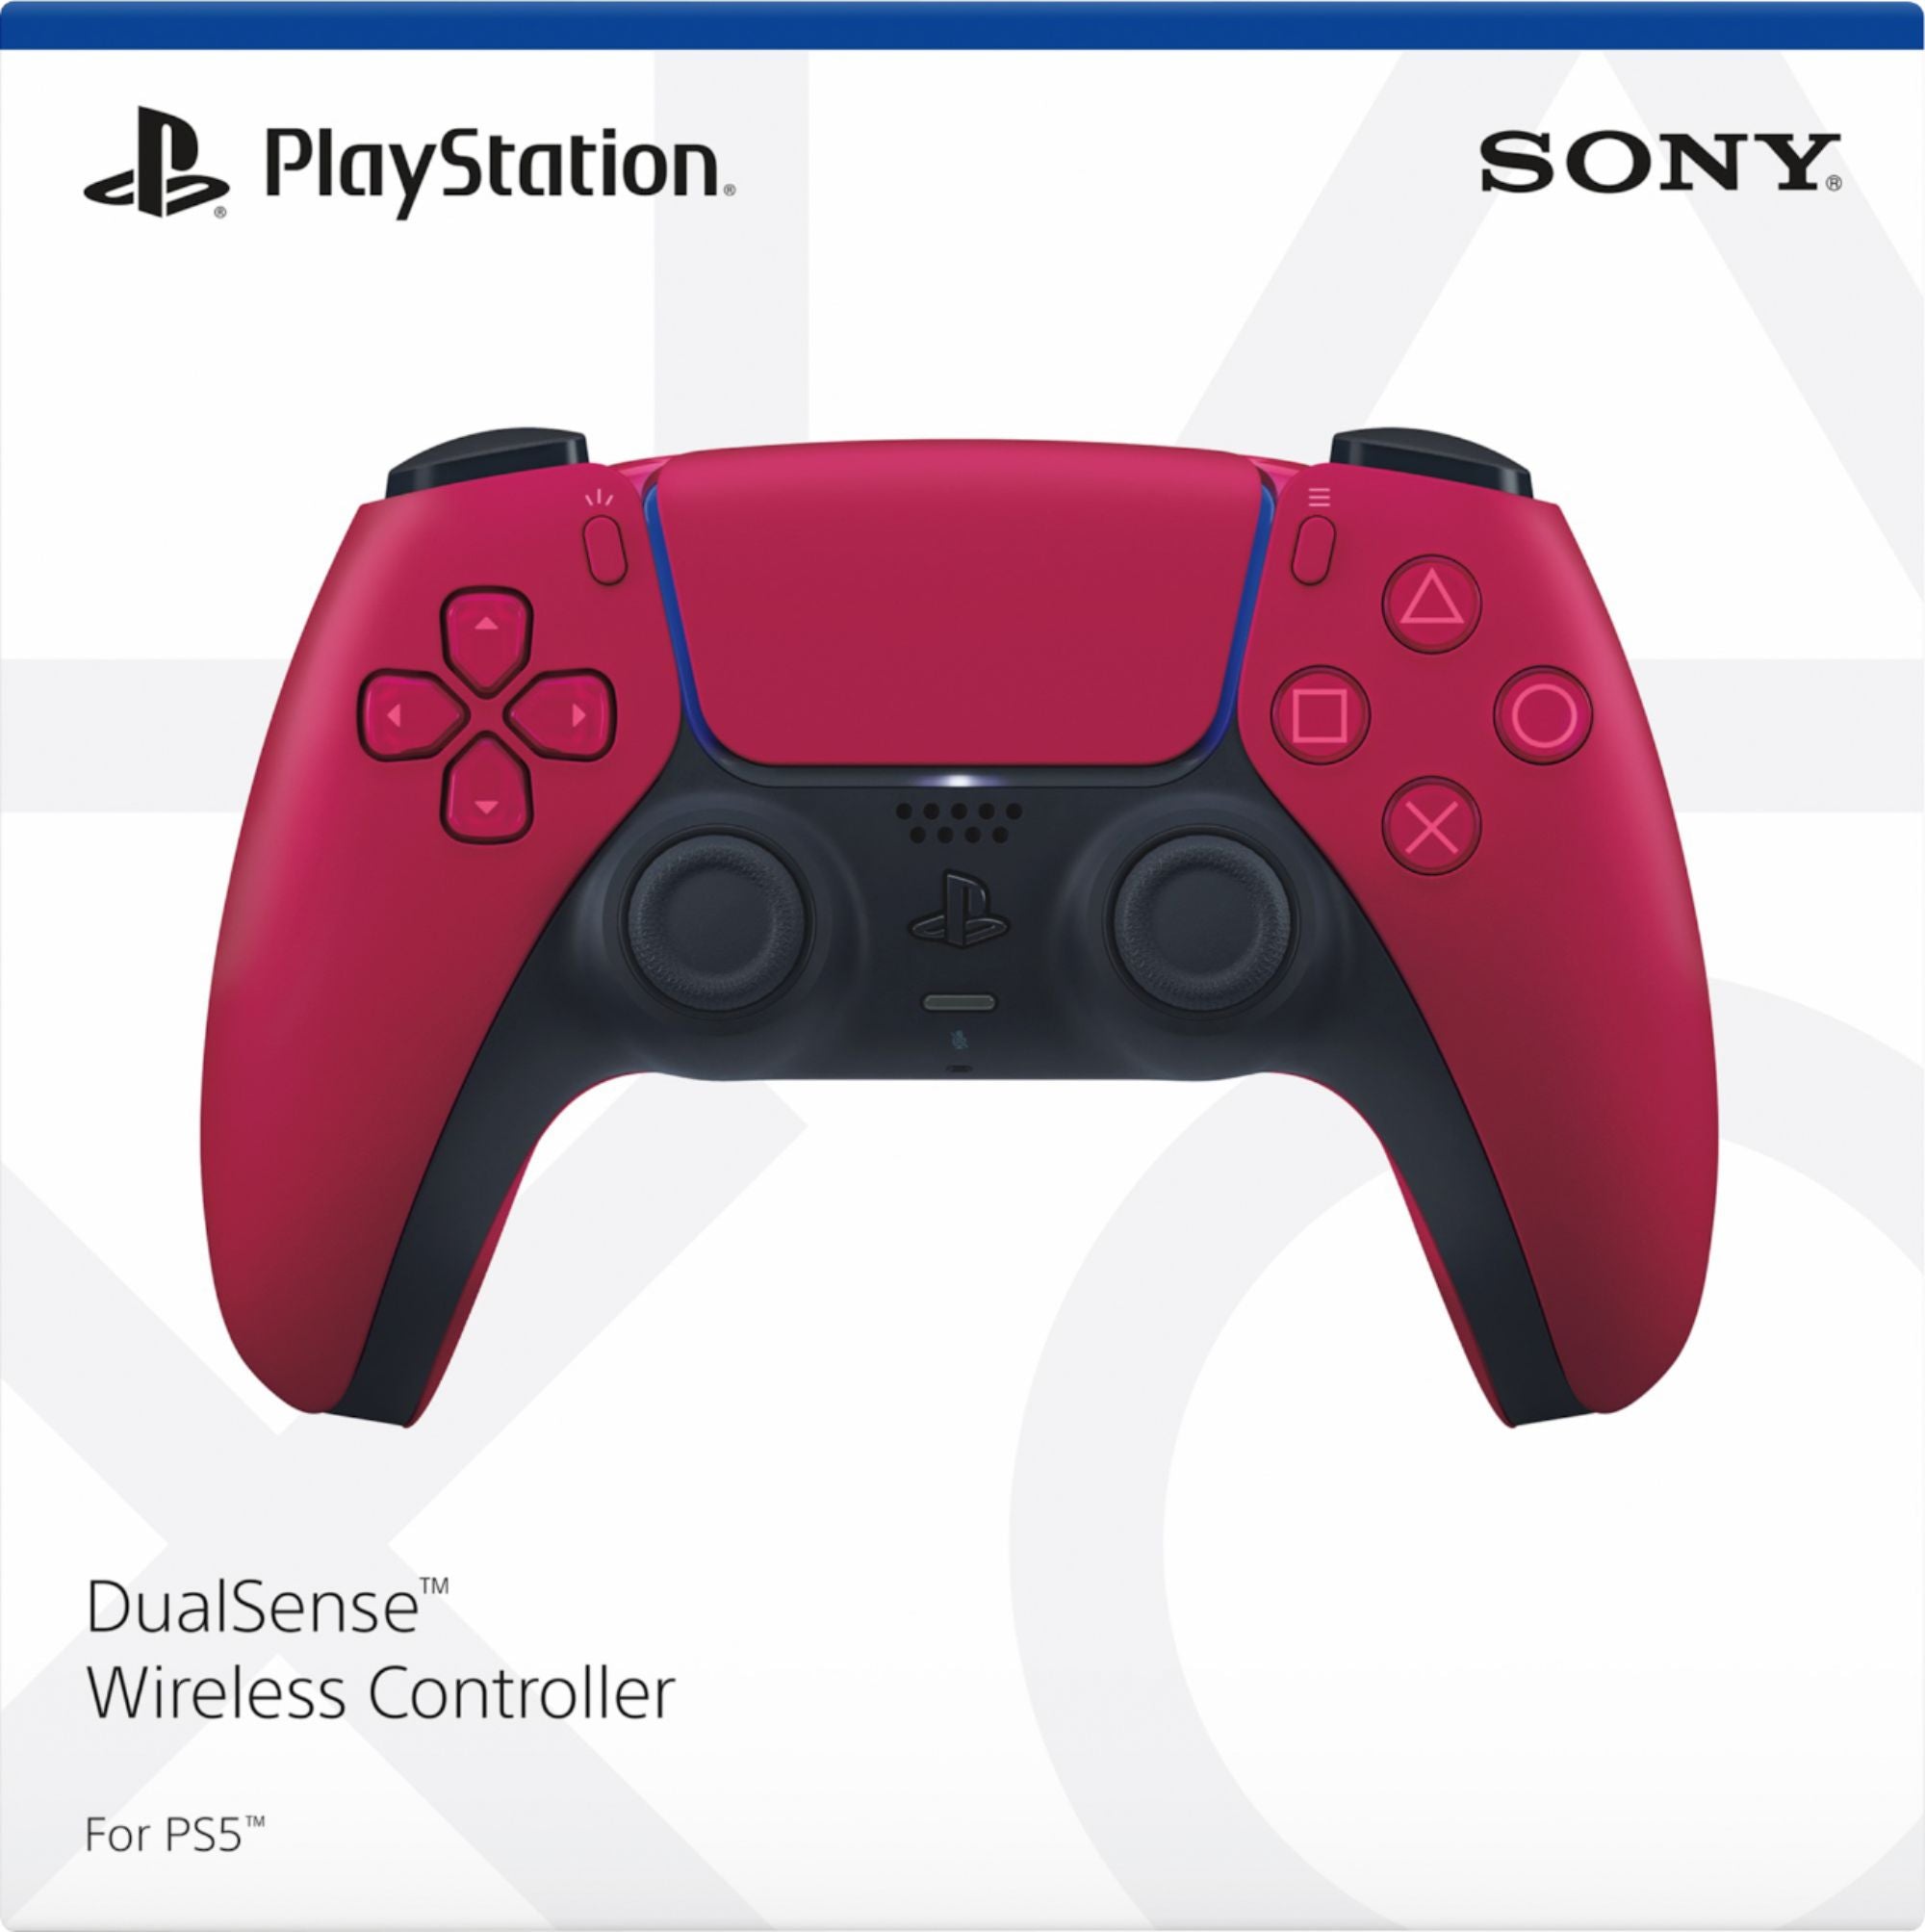 PlayStation 5 Digital Edition with Two Controllers White and Cosmic Red DualSense and Mytrix Hard Shell Protective Controller Case - PS5 Gaming Console